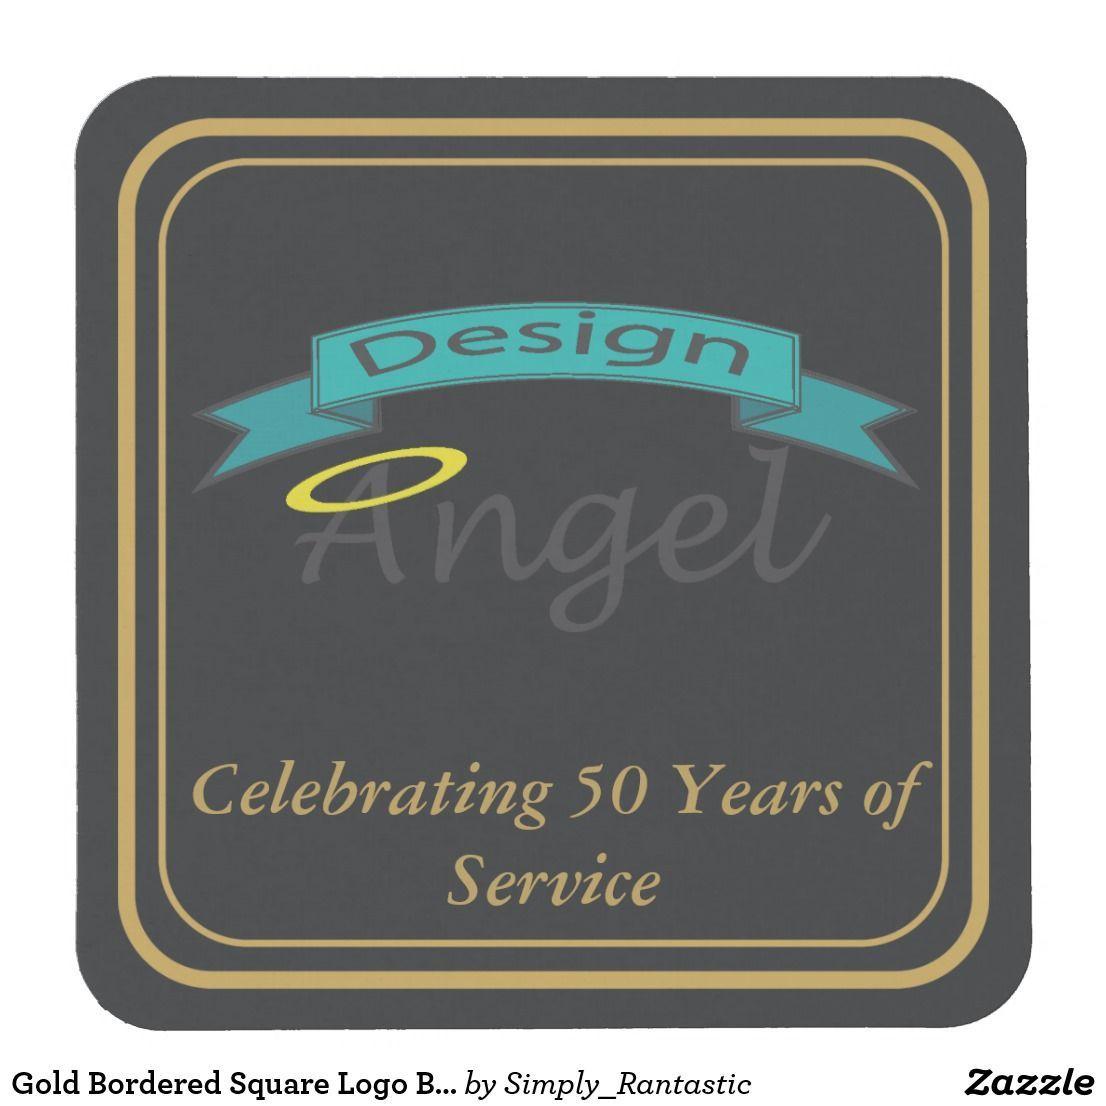 Silver and Blue Square Logo - Gold Bordered Square Logo Branded Paper Coasters